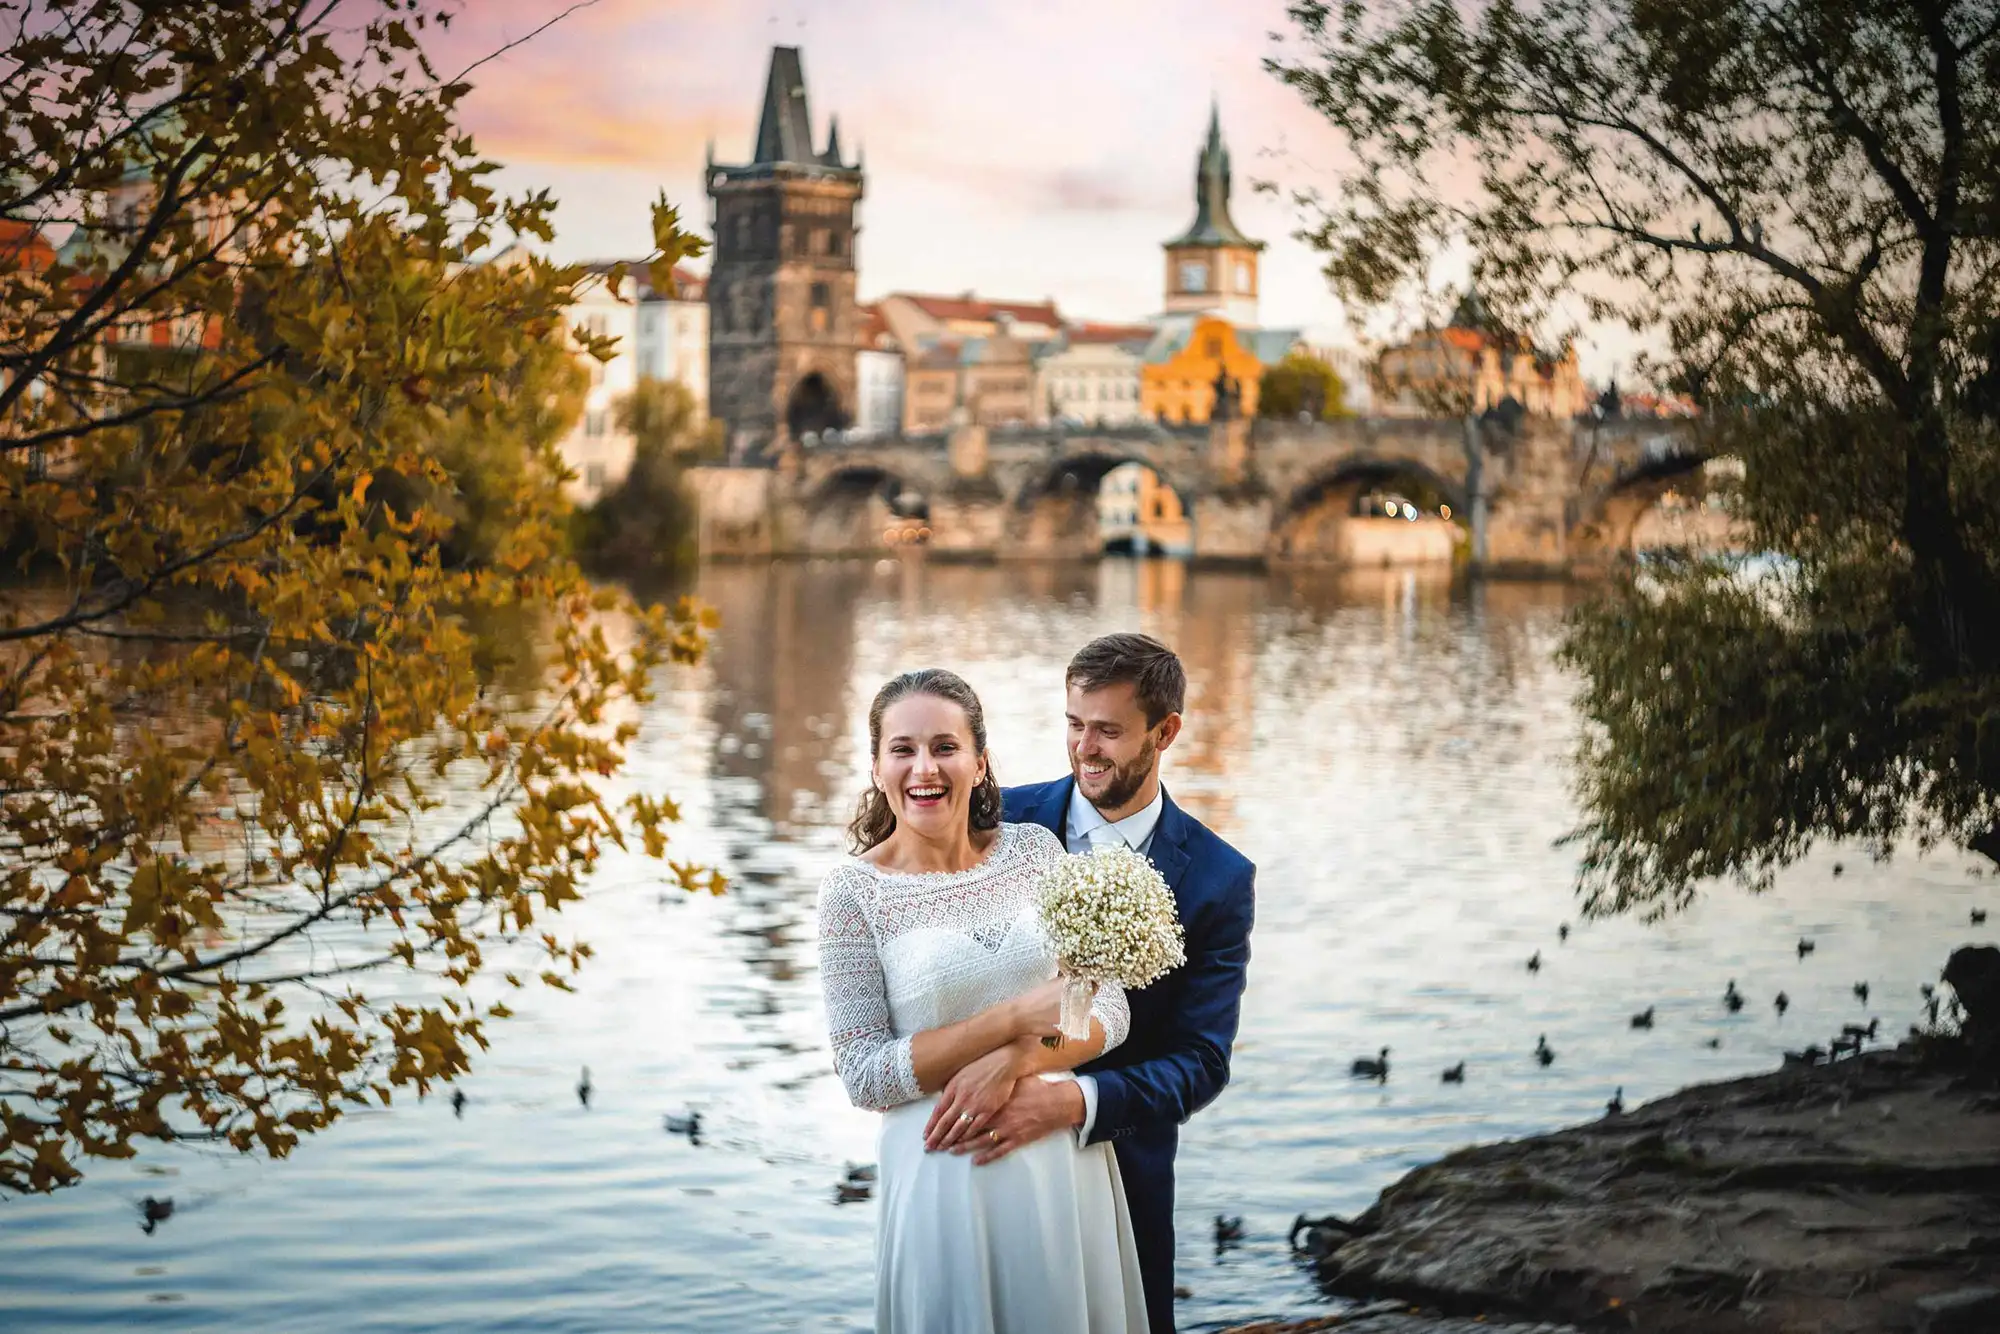 wedding photos by the Vltava River - the canal and the Charles Bridge in the background